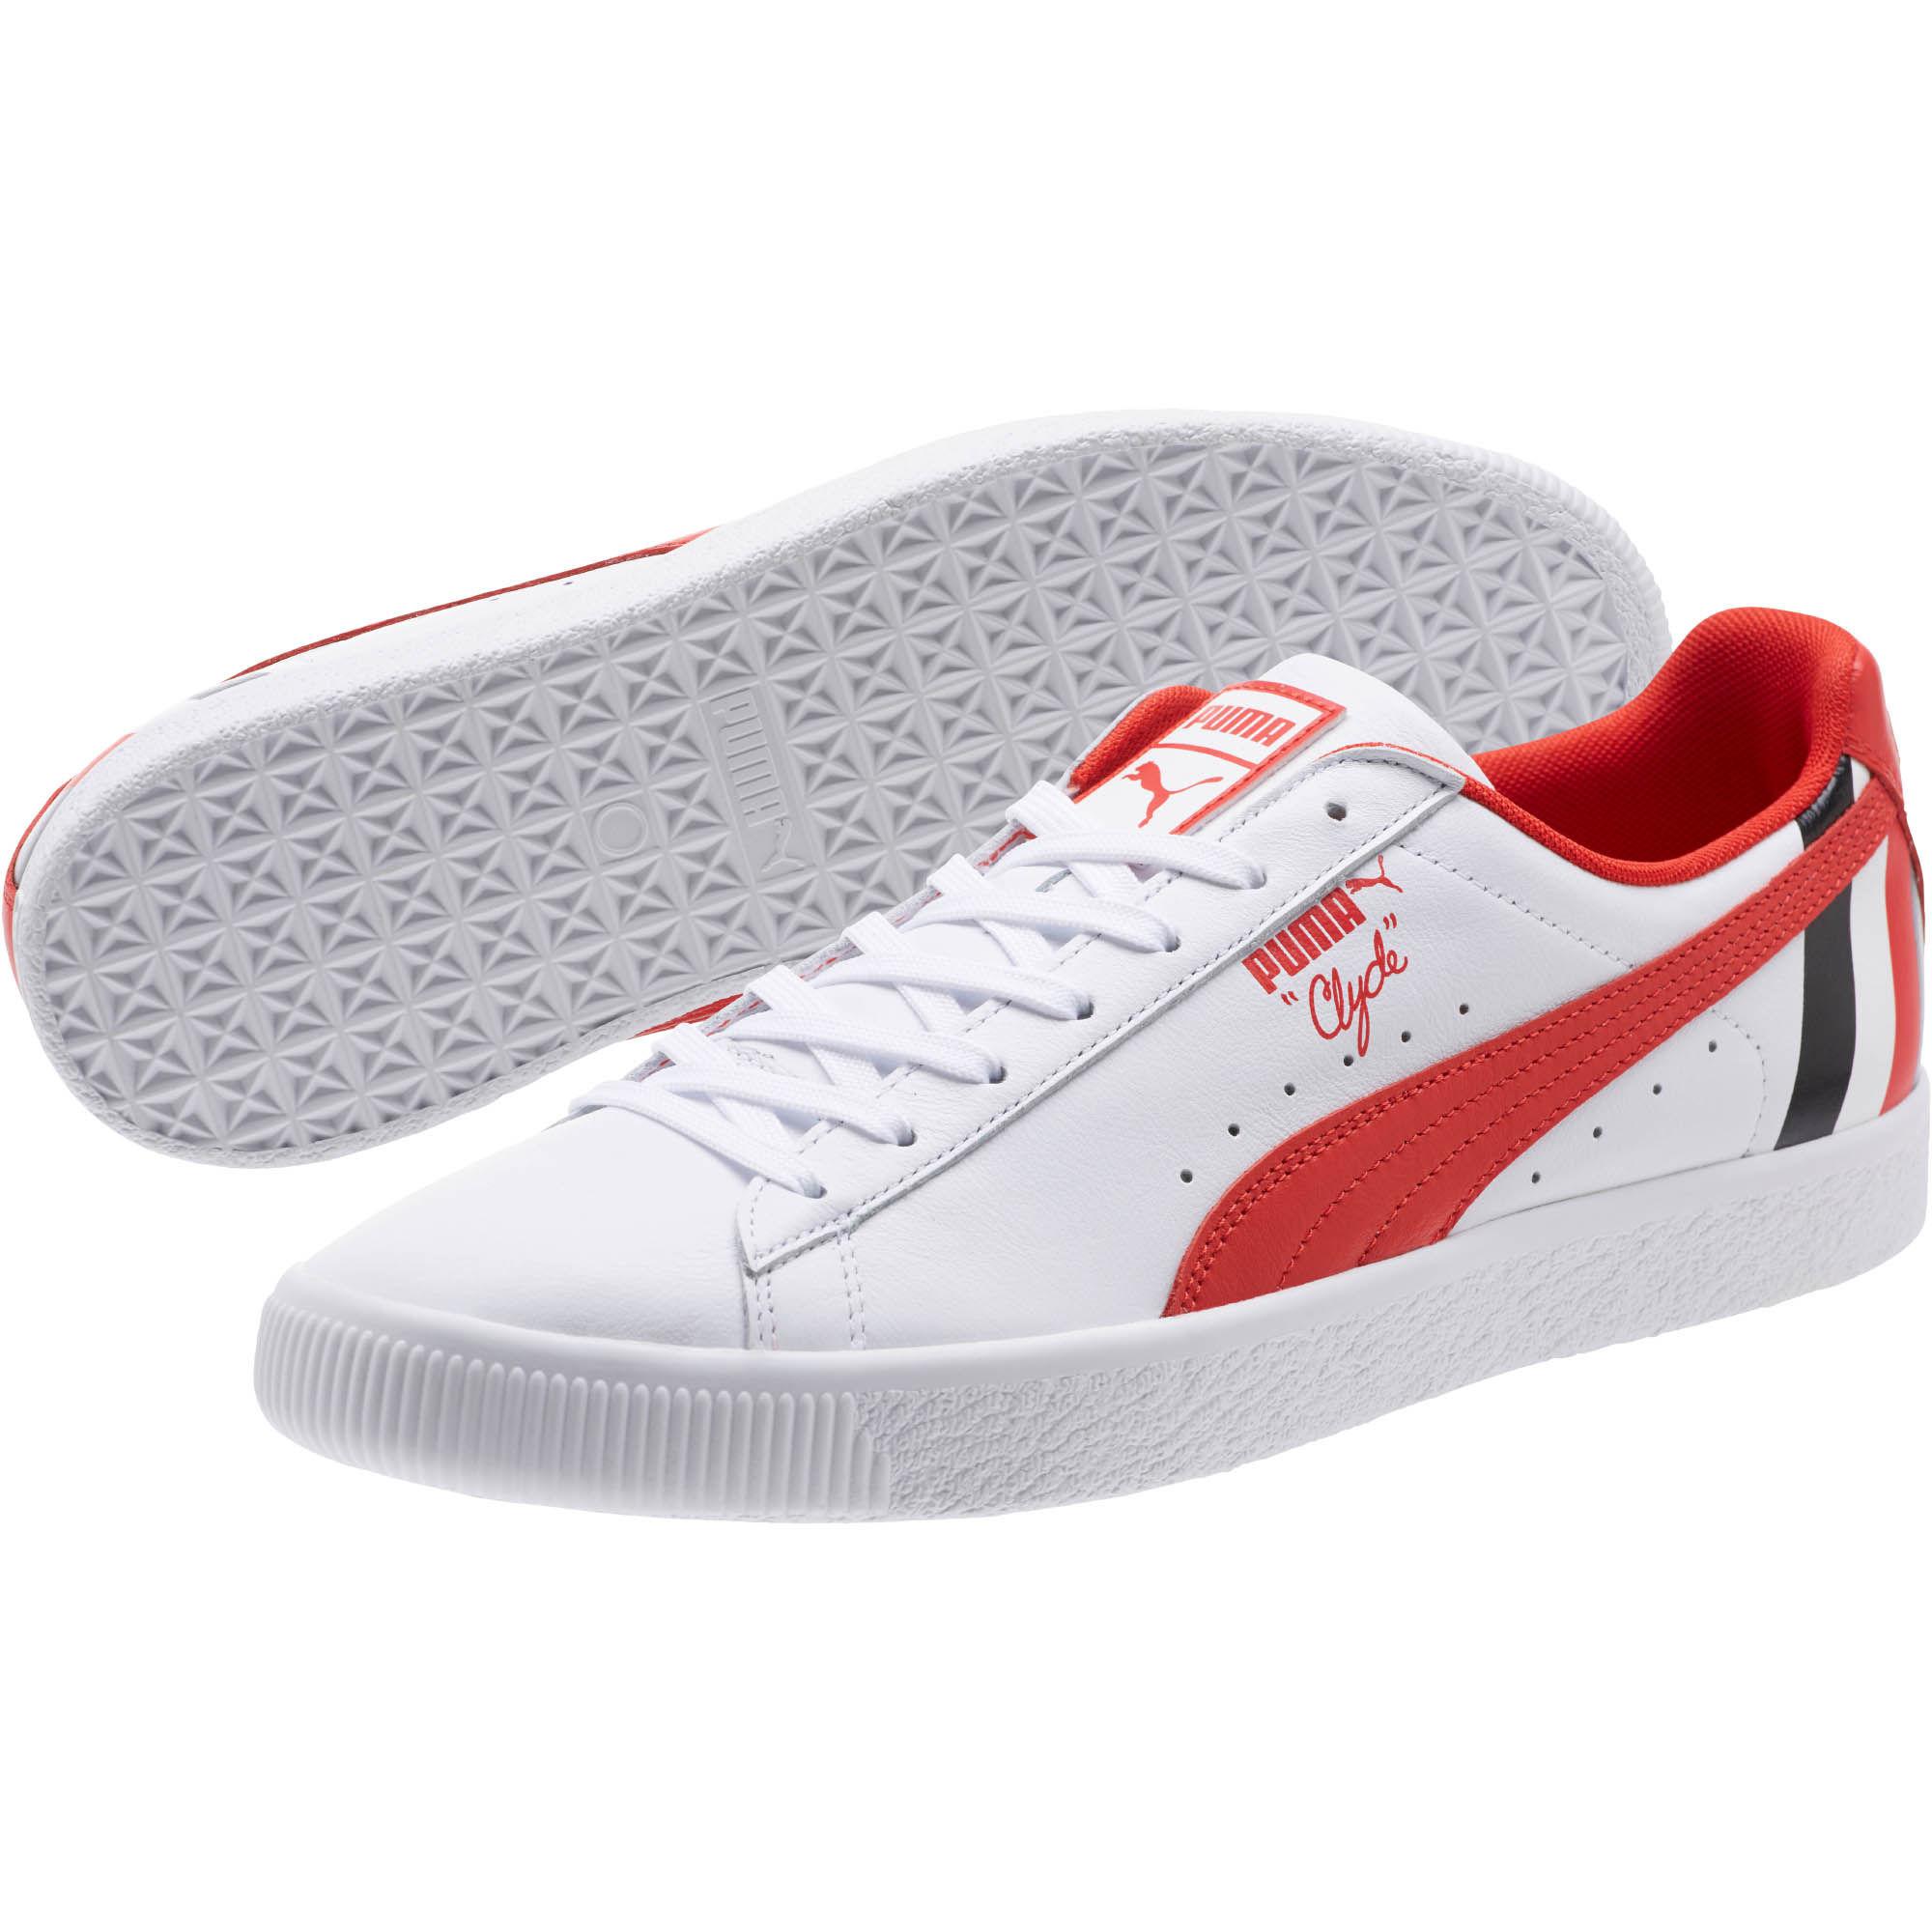 PUMA Clyde Stripes Men's Sneakers in White for Men - Lyst